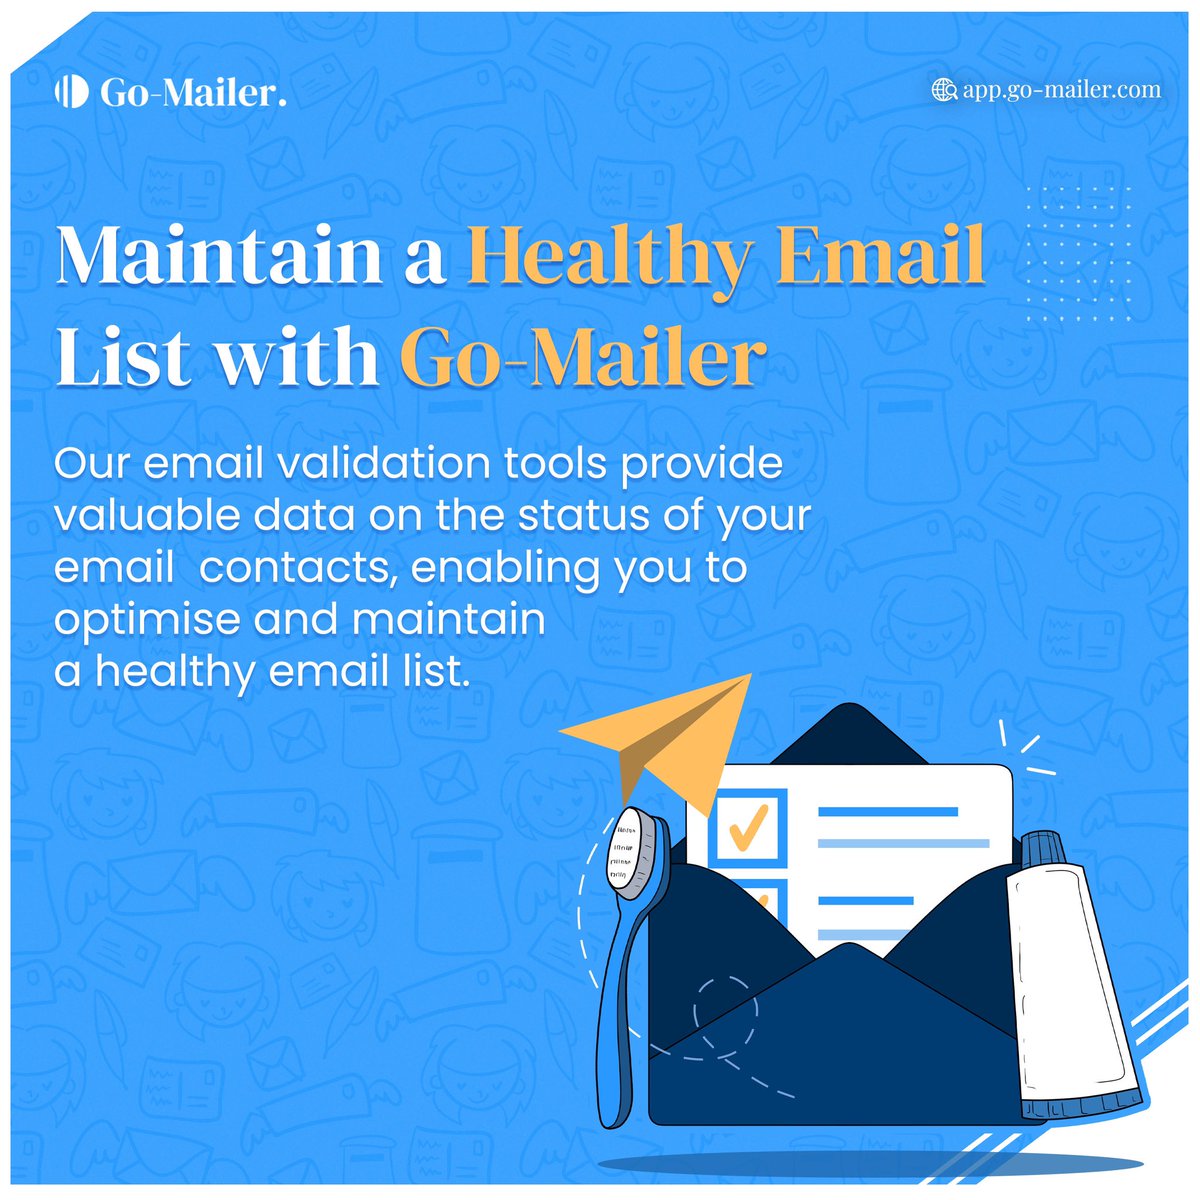 We ensure that you are adequately equipped with the information you need to clean your email lists. 

Maintain a healthy email list and keep your customers engaged and interested!

Sign up for free today | link in bio
.
#emailmarketing #gomailer #emaillist #digitalmarketing